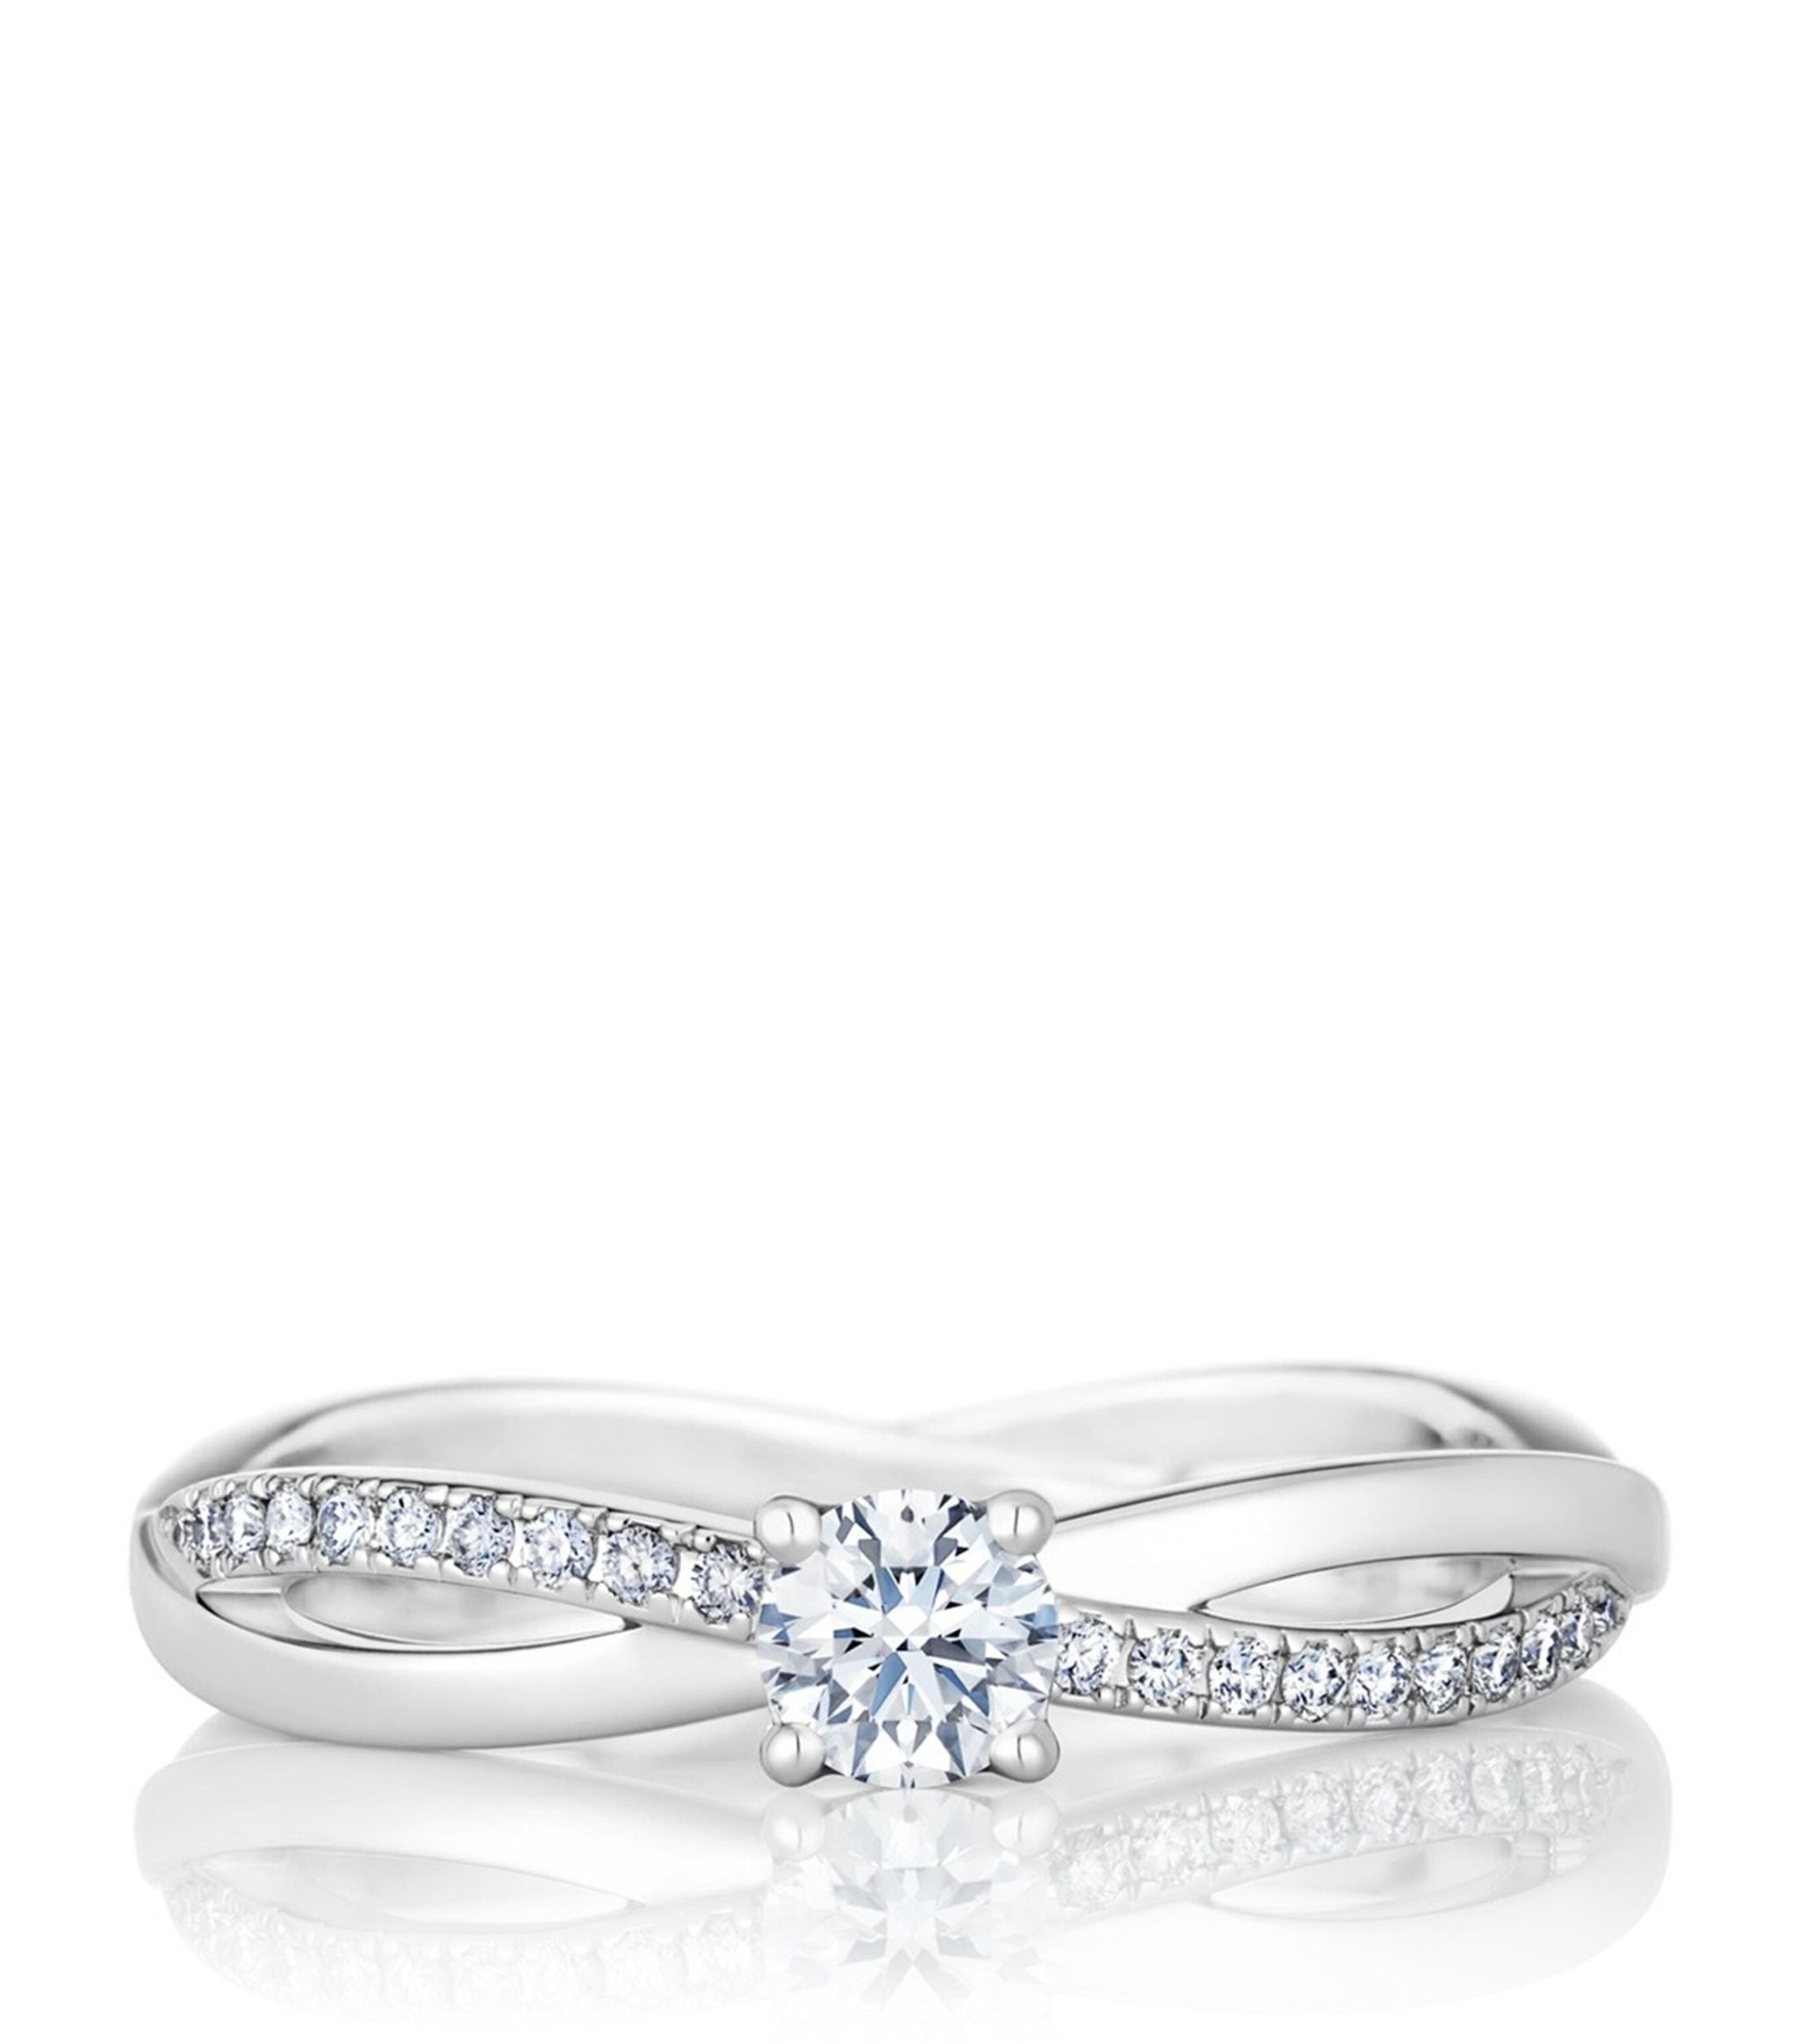 DeBeers Latest Engagement Ring Collection Comes From Ten Contemporary  Jewelry Designers | Vogue